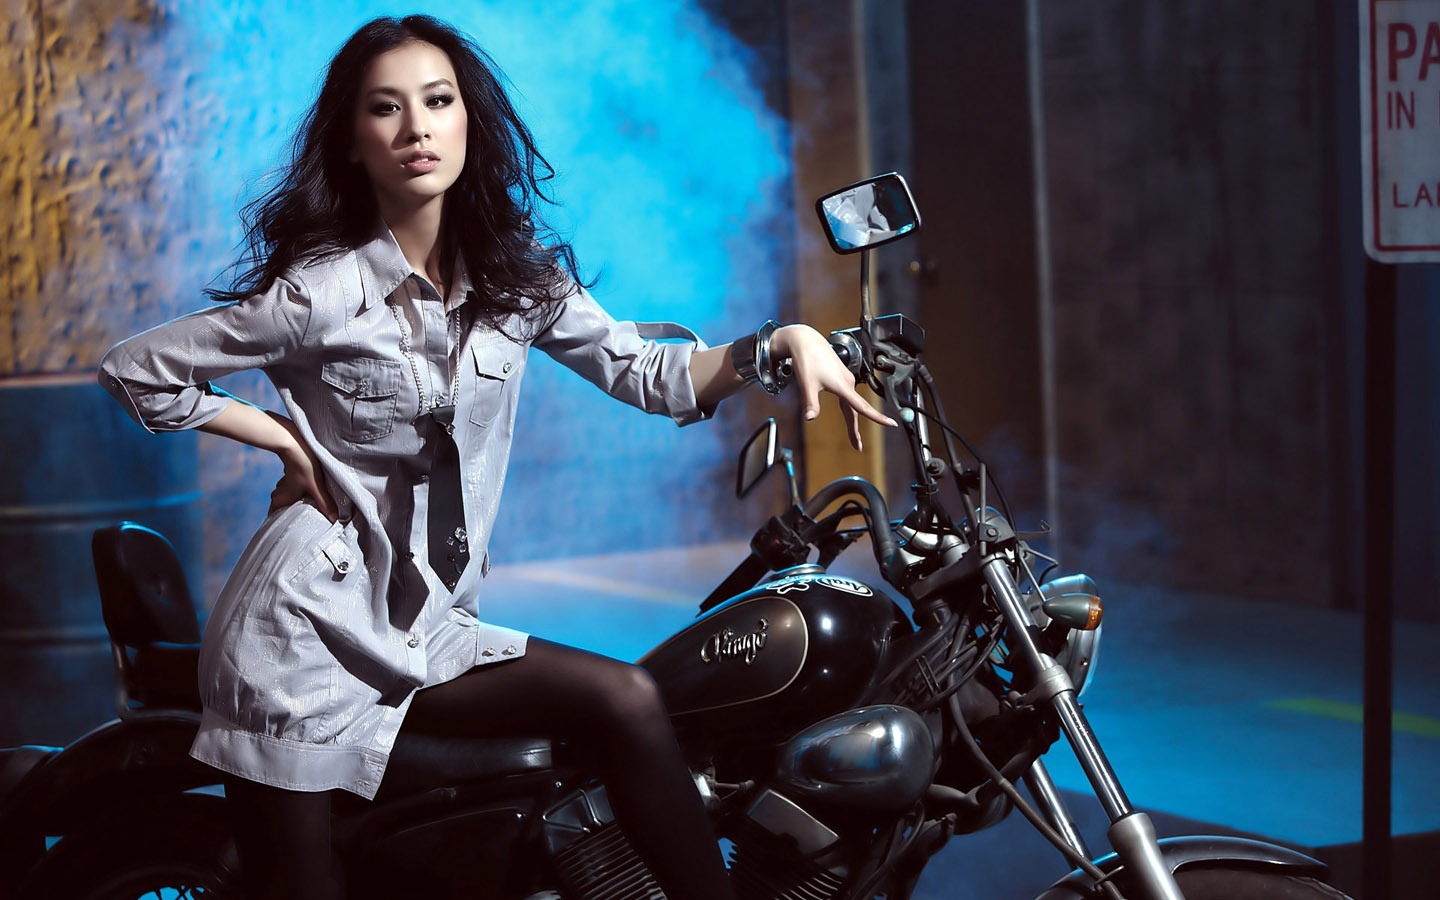 Girls & Motorcycles Picture